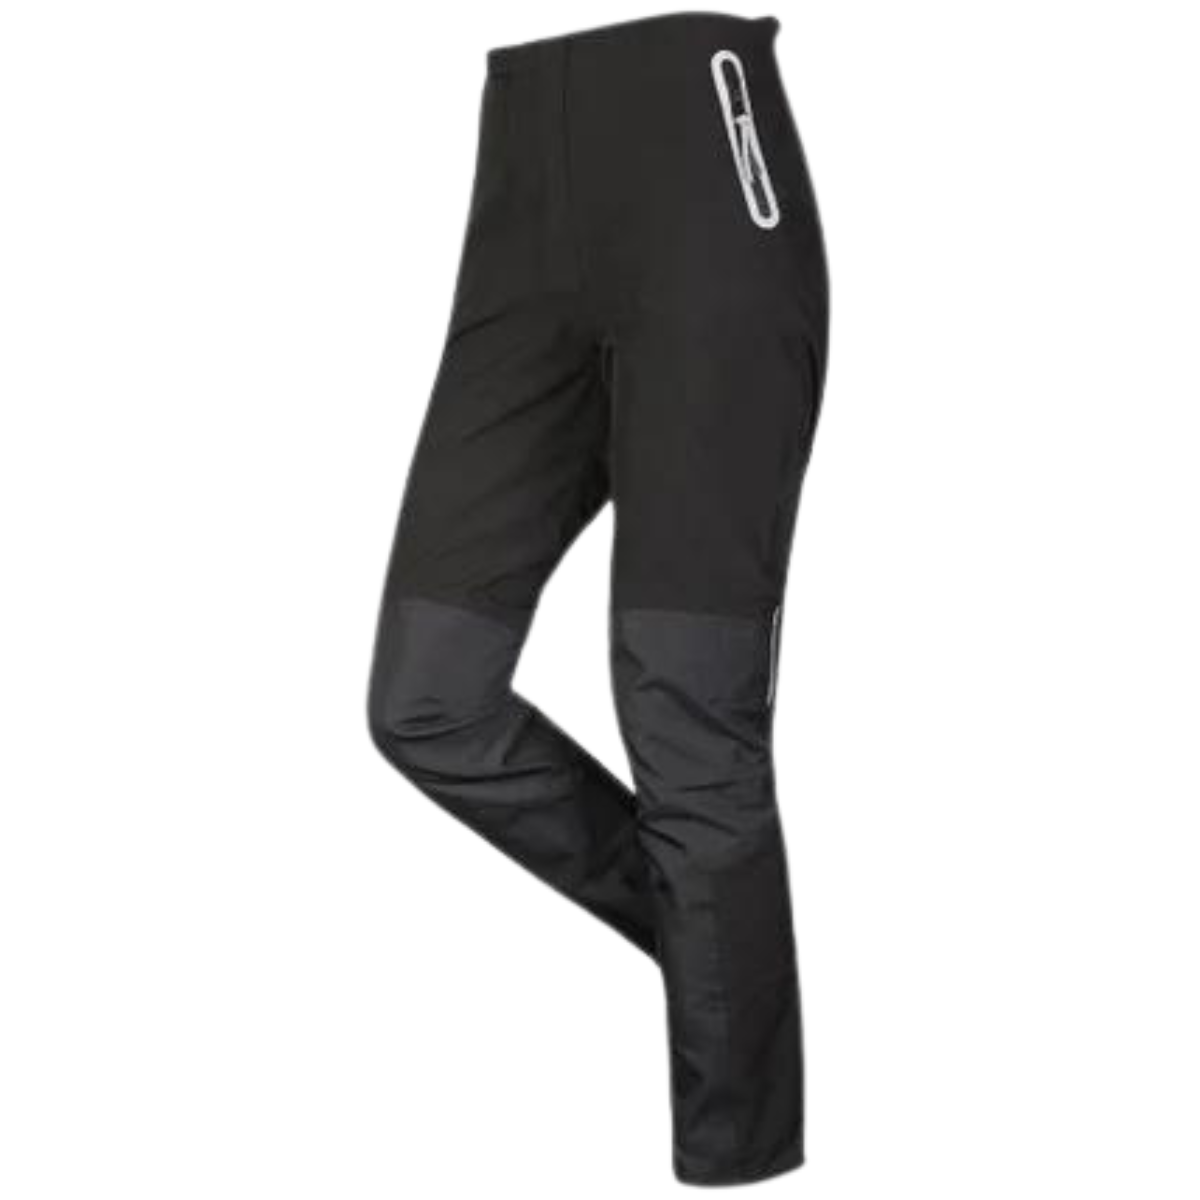 LeMieux 'Drytex Stormwear' Over Trousers in Black